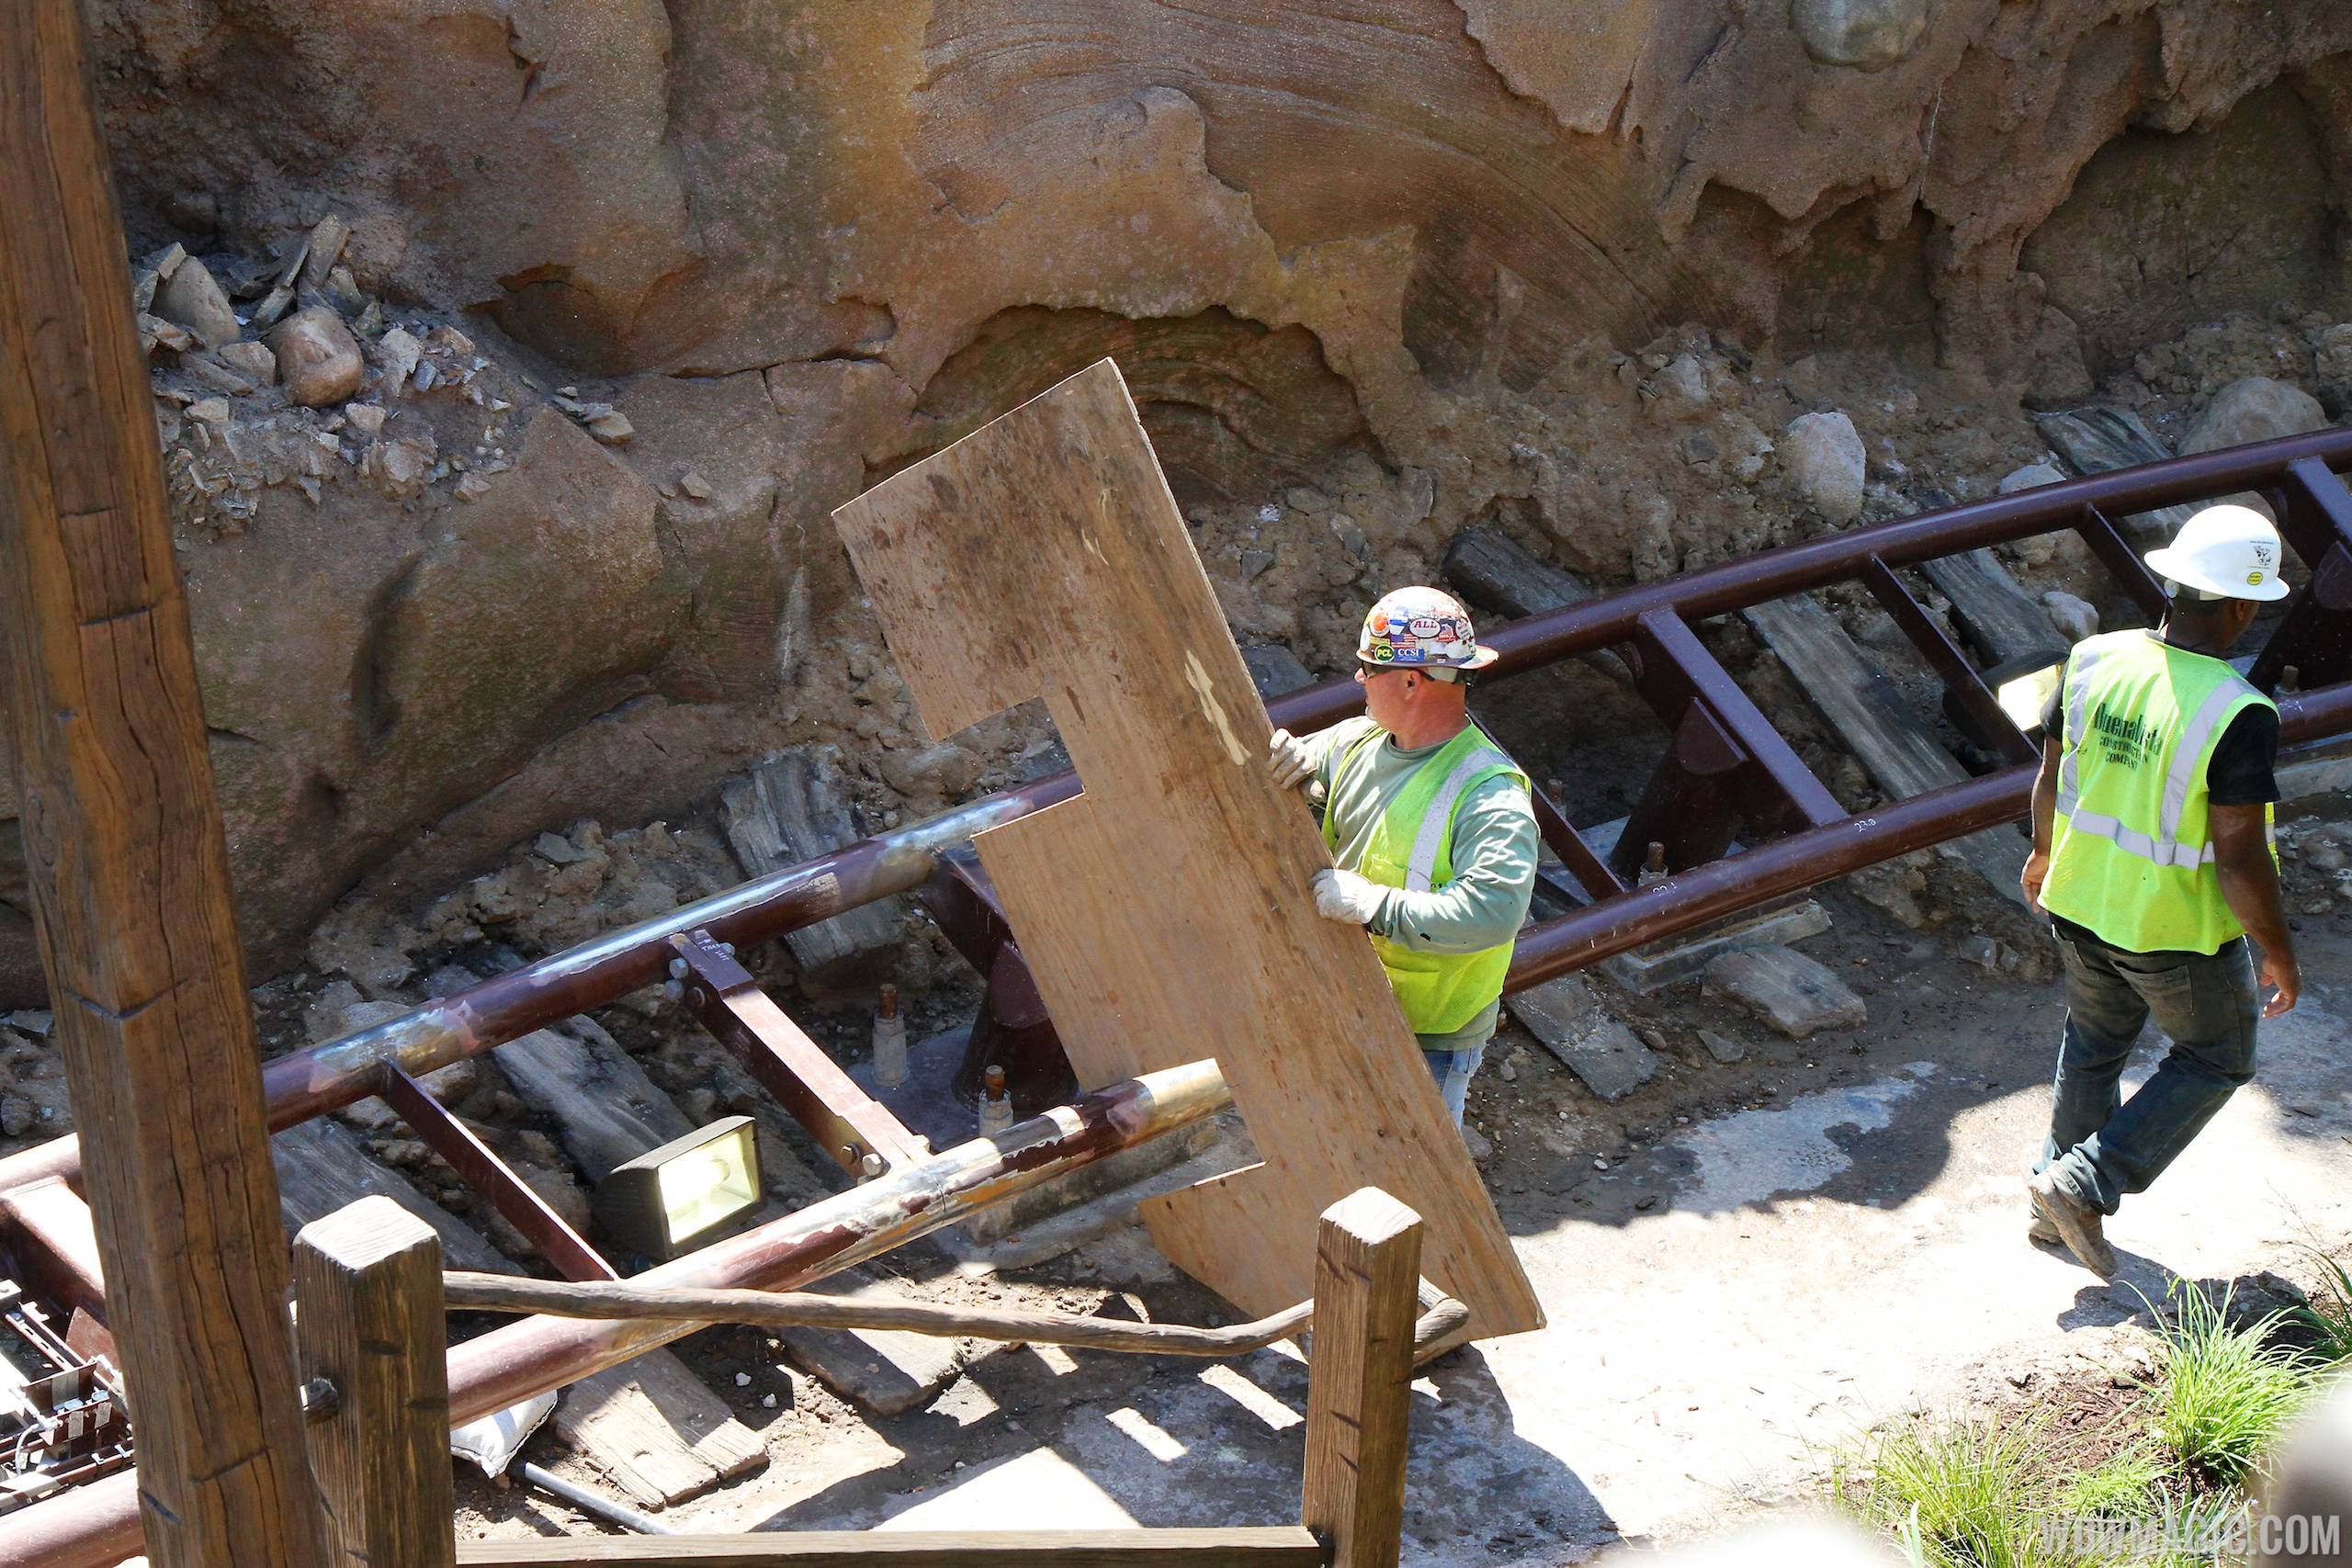 PHOTOS - Final touches being put on the Seven Dwarfs Mine Train coaster in New Fantasyland